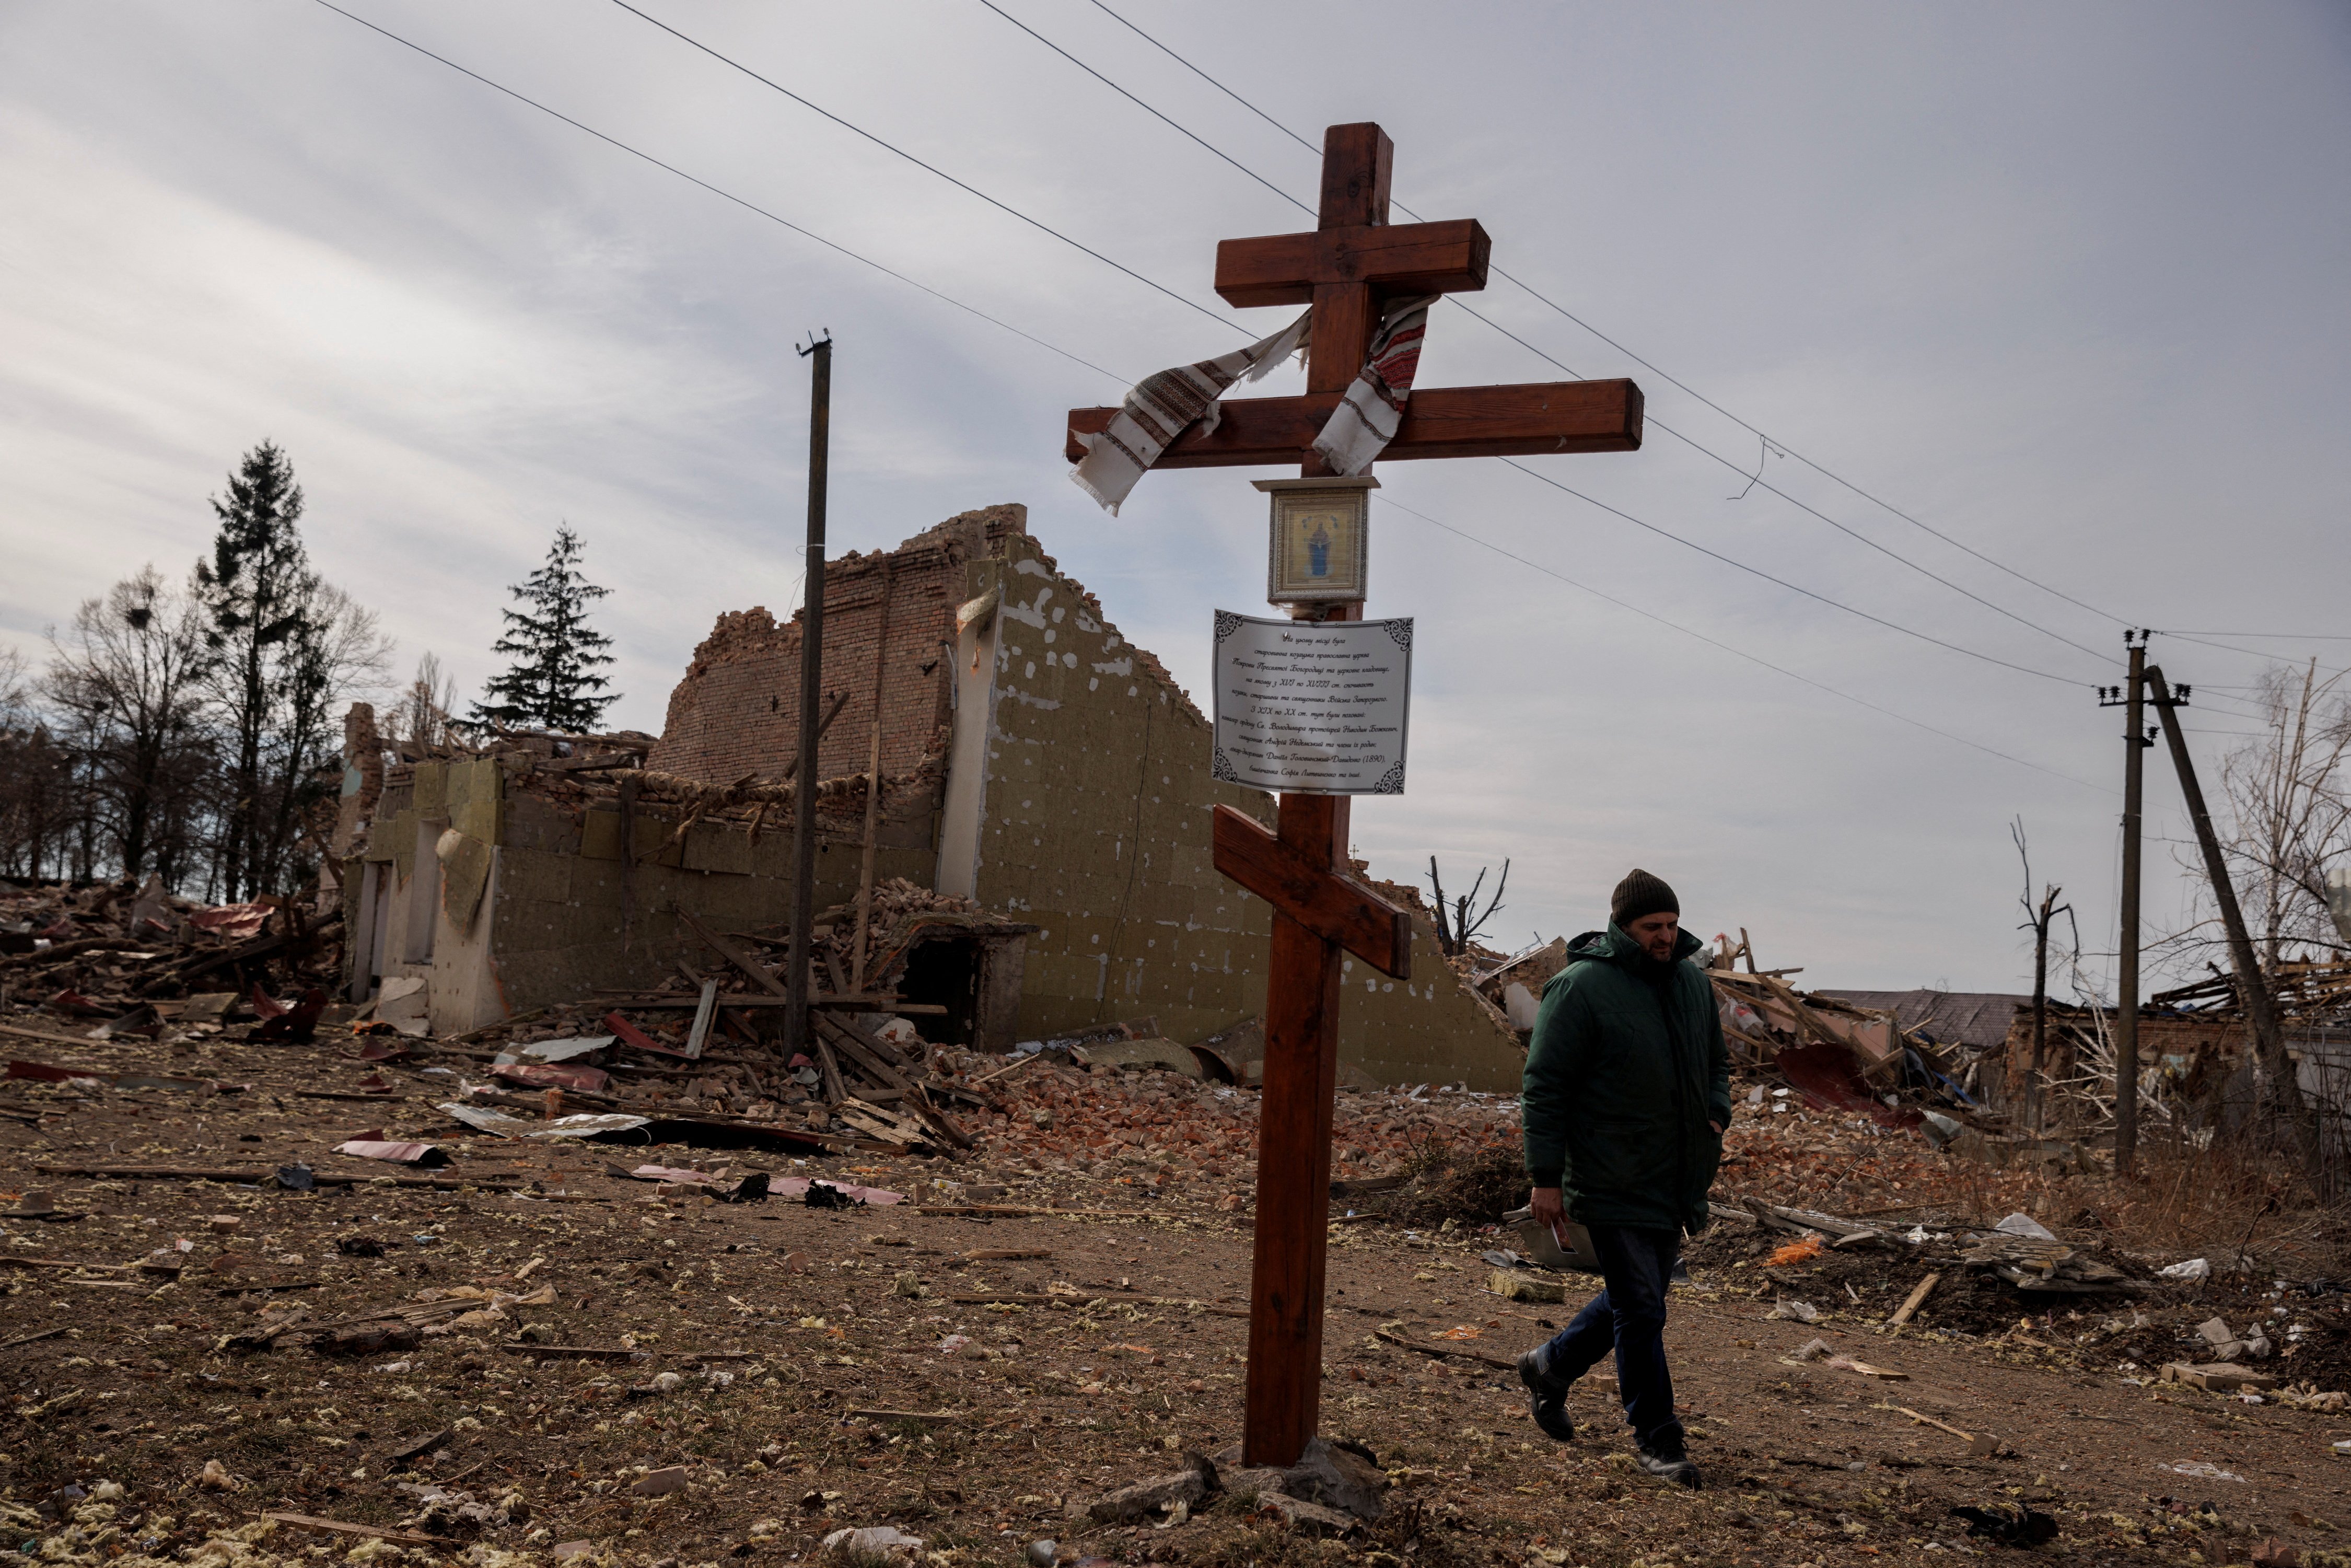 A man walks by the debris of a cultural center and an administration building destroyed during aerial bombing, as Russia's advance on the Ukrainian capital continues, in the village of Byshiv outside Kyiv, Ukraine, March 12, 2022. (CNS photo/Thomas Peter,